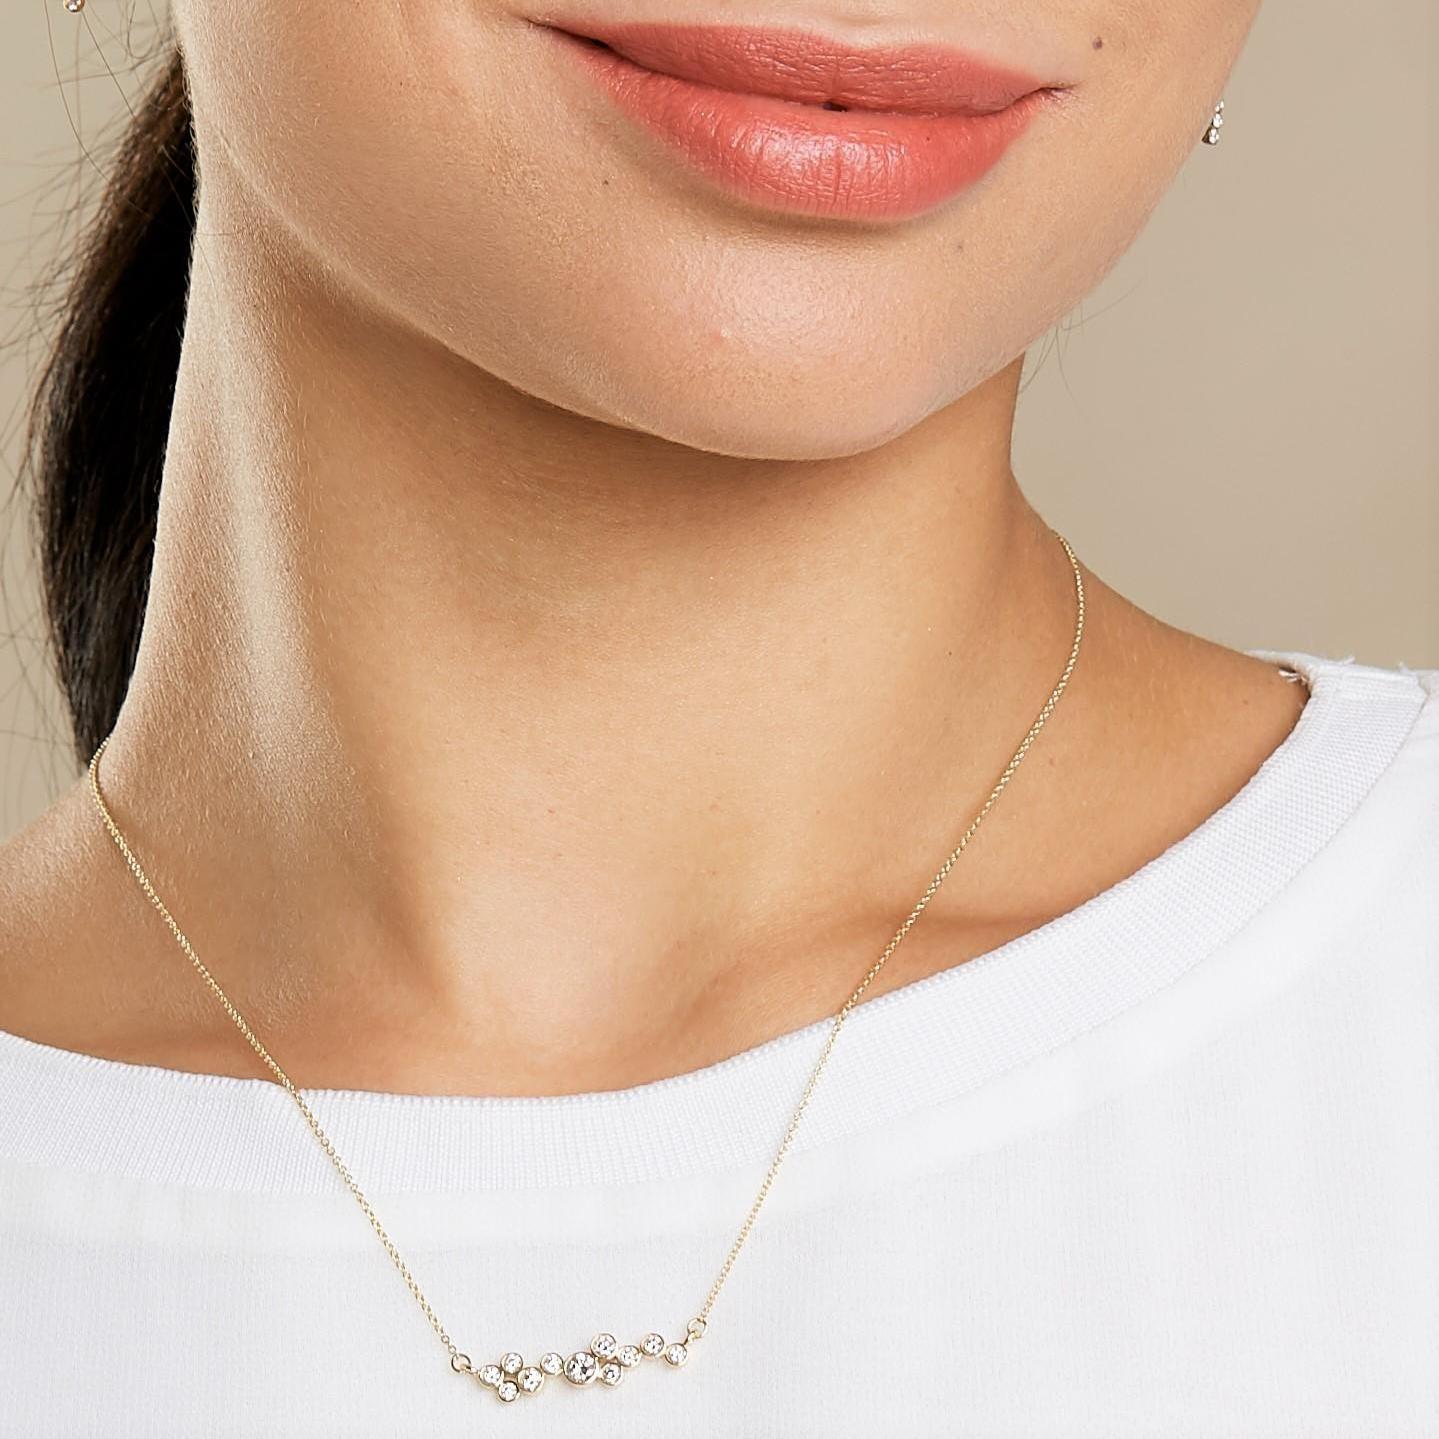 Created in 18 karat yellow gold
Diamonds 0.50 cts
16 inch cable chain
18kyg lobster lock

A luxurious 18 karat yellow gold necklace crafted with an alluring 0.50 cts of diamonds and a delicate 16-inch cable chain that fastens with an 18kyg lobster